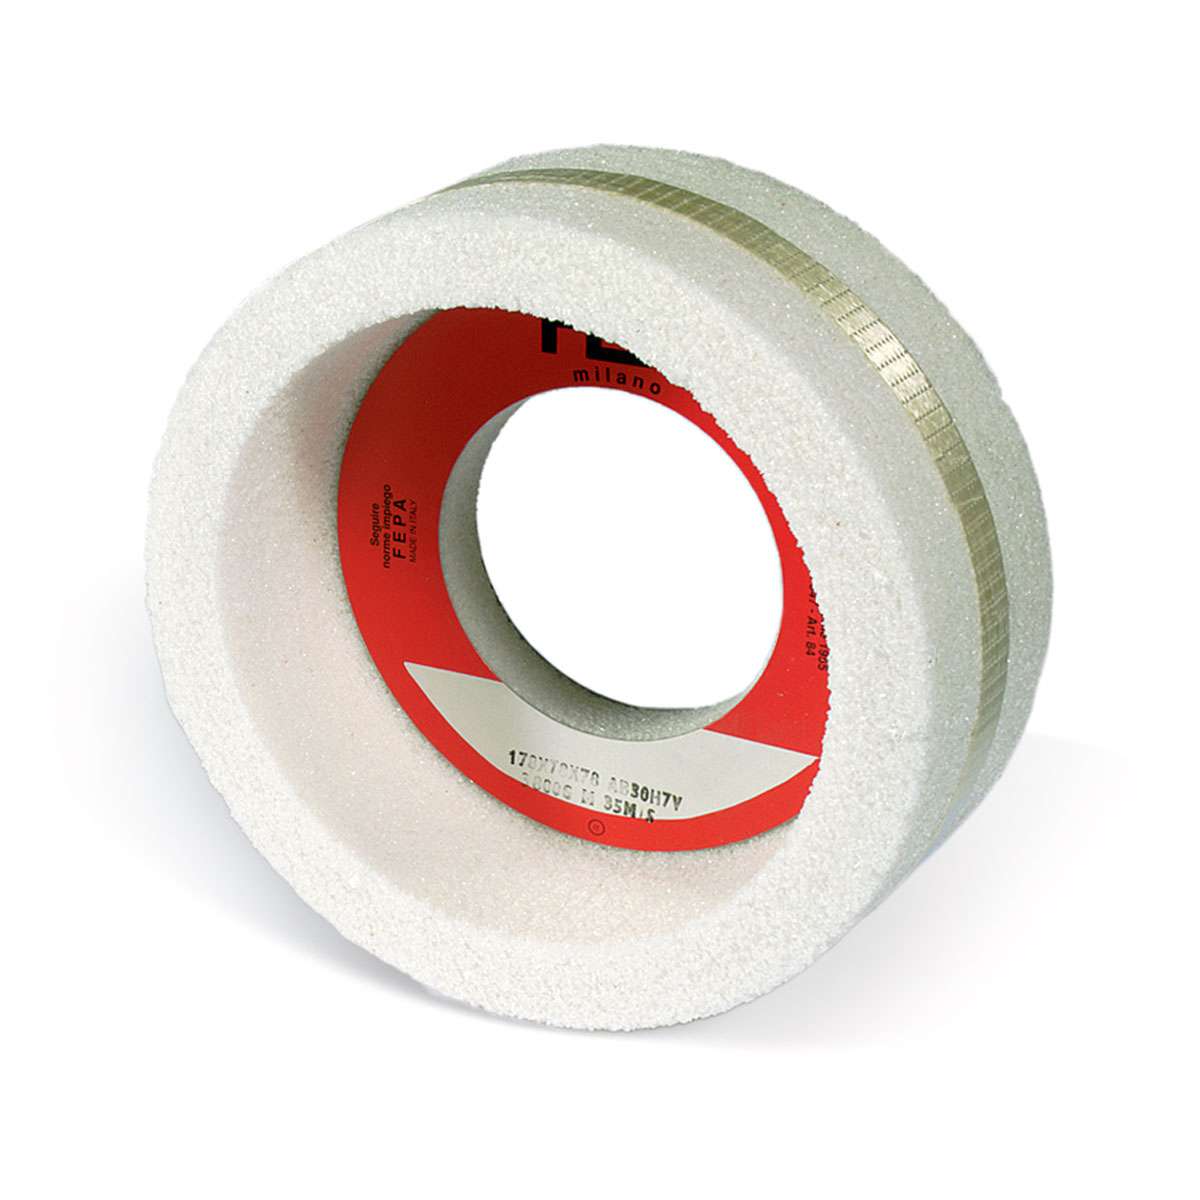 Cylindrical Cup Grinding Wheels MBT White corundum Rosver - Conf.1pz